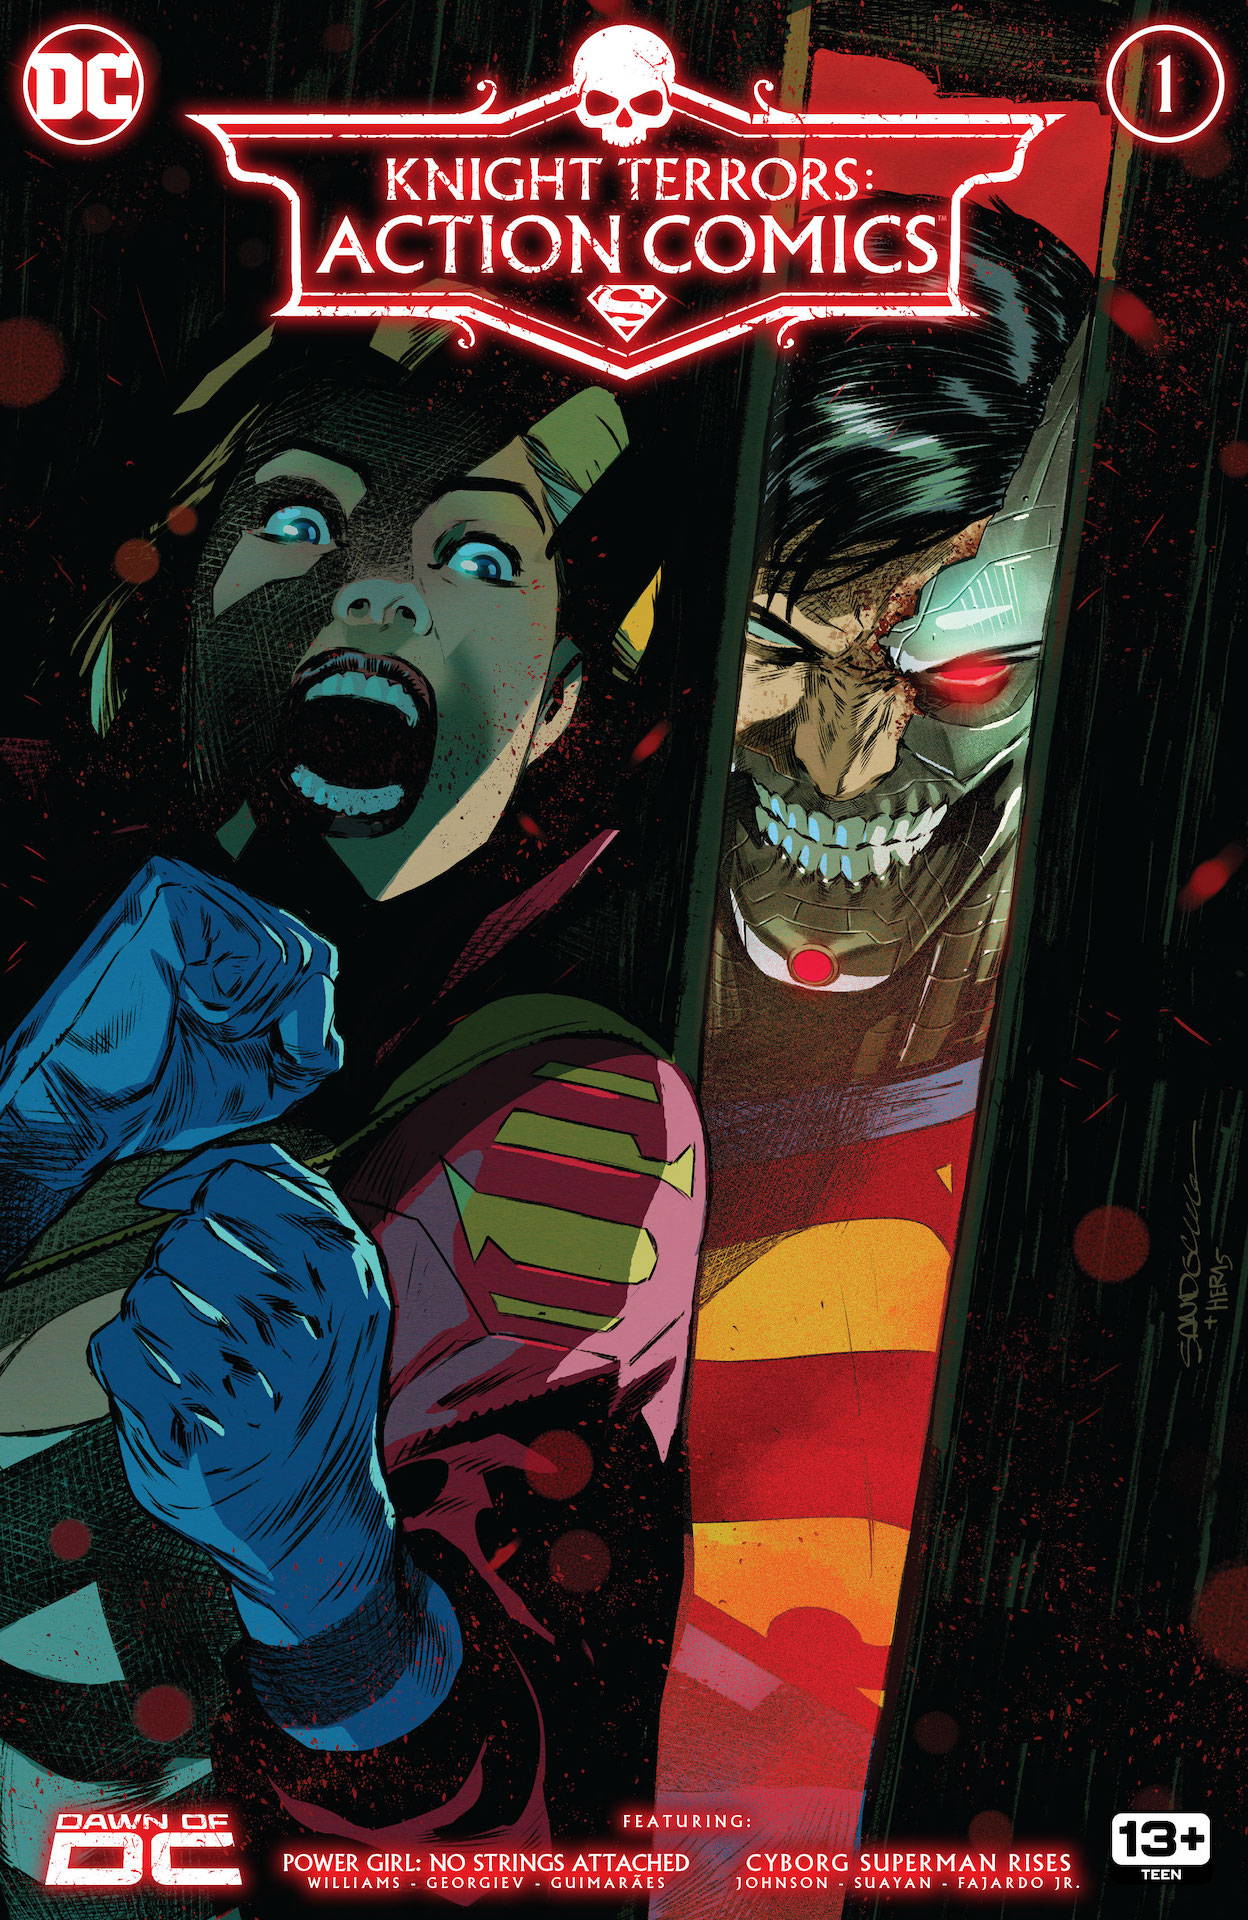 DC Preview: Knight Terrors: Action Comics #1